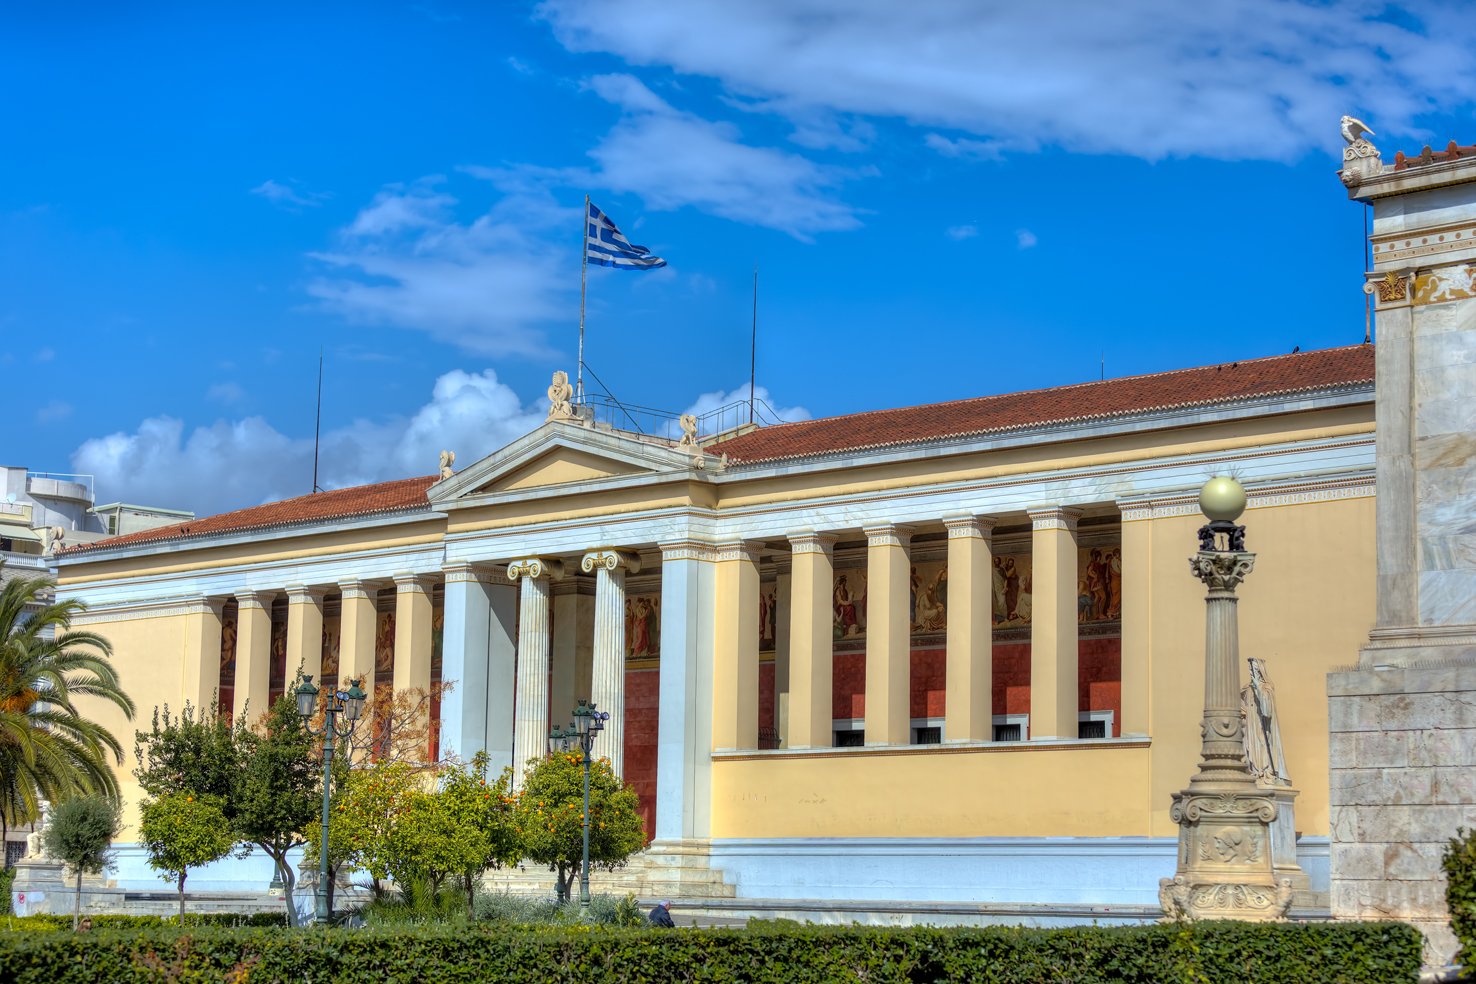 When local goes global: the University of Athens educates the world